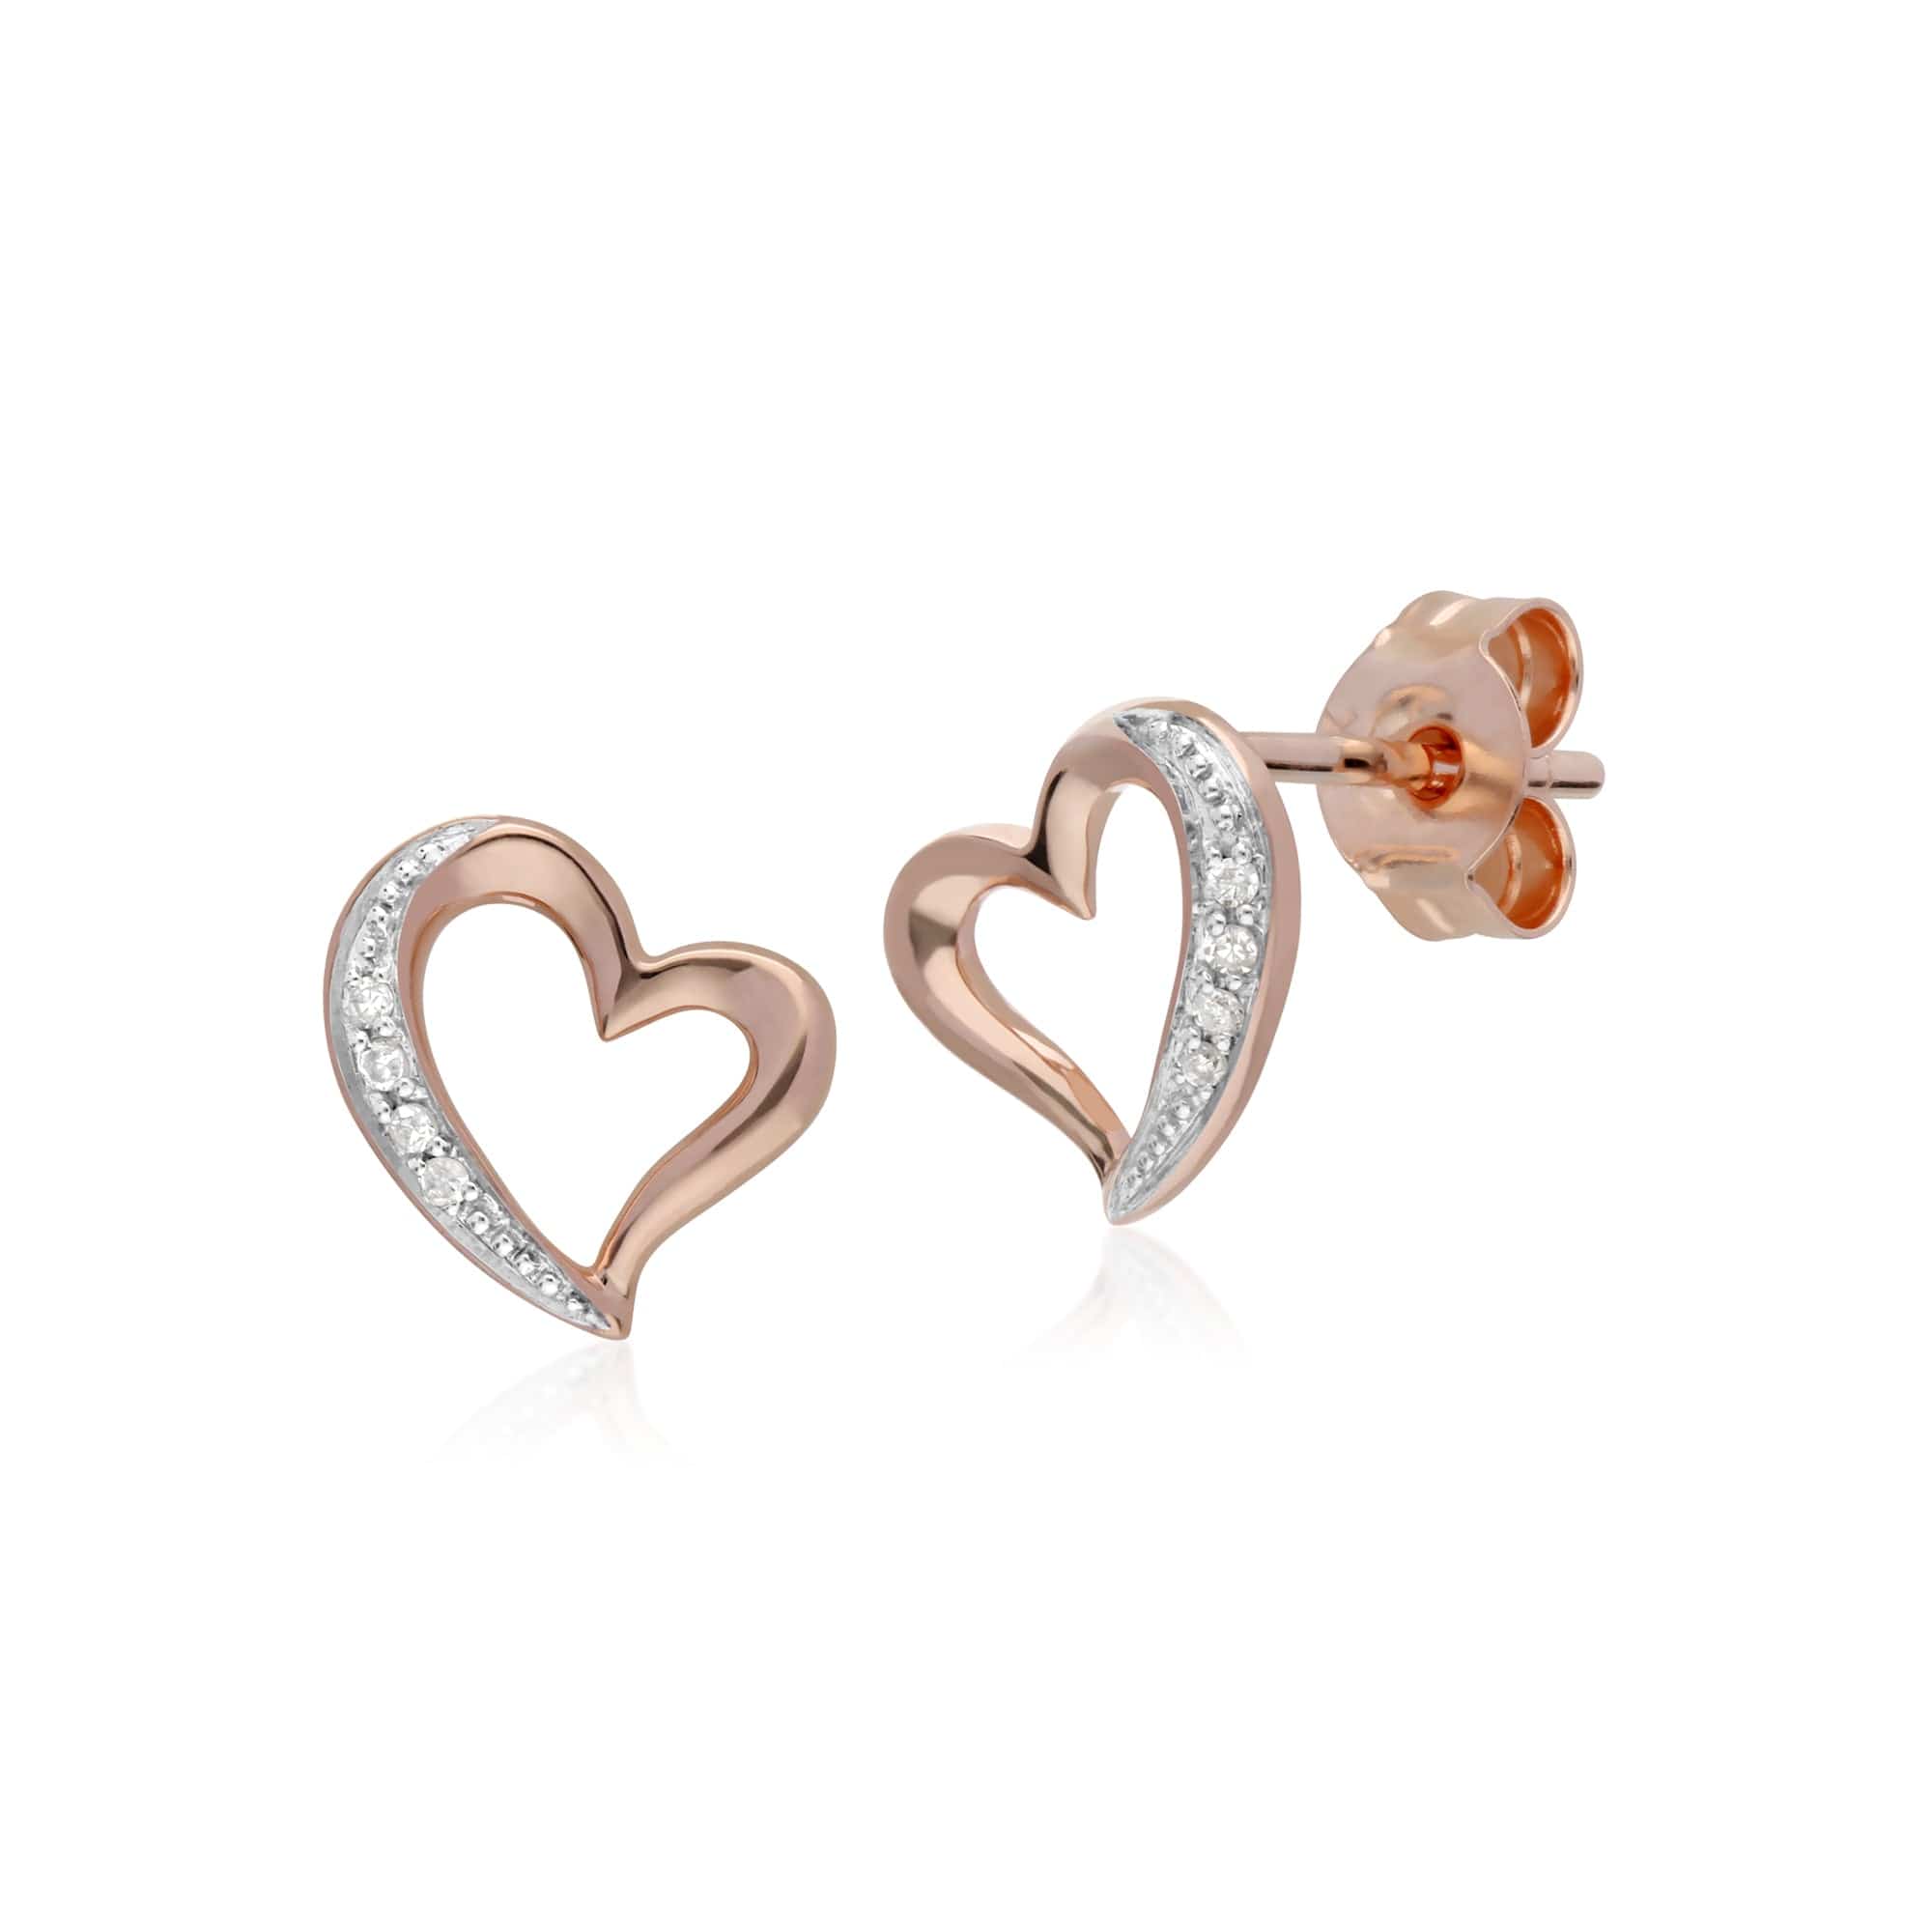 191E0386019 Classic Round Diamond Open Love Heart Stud Earrings in 9ct Rose Gold 1